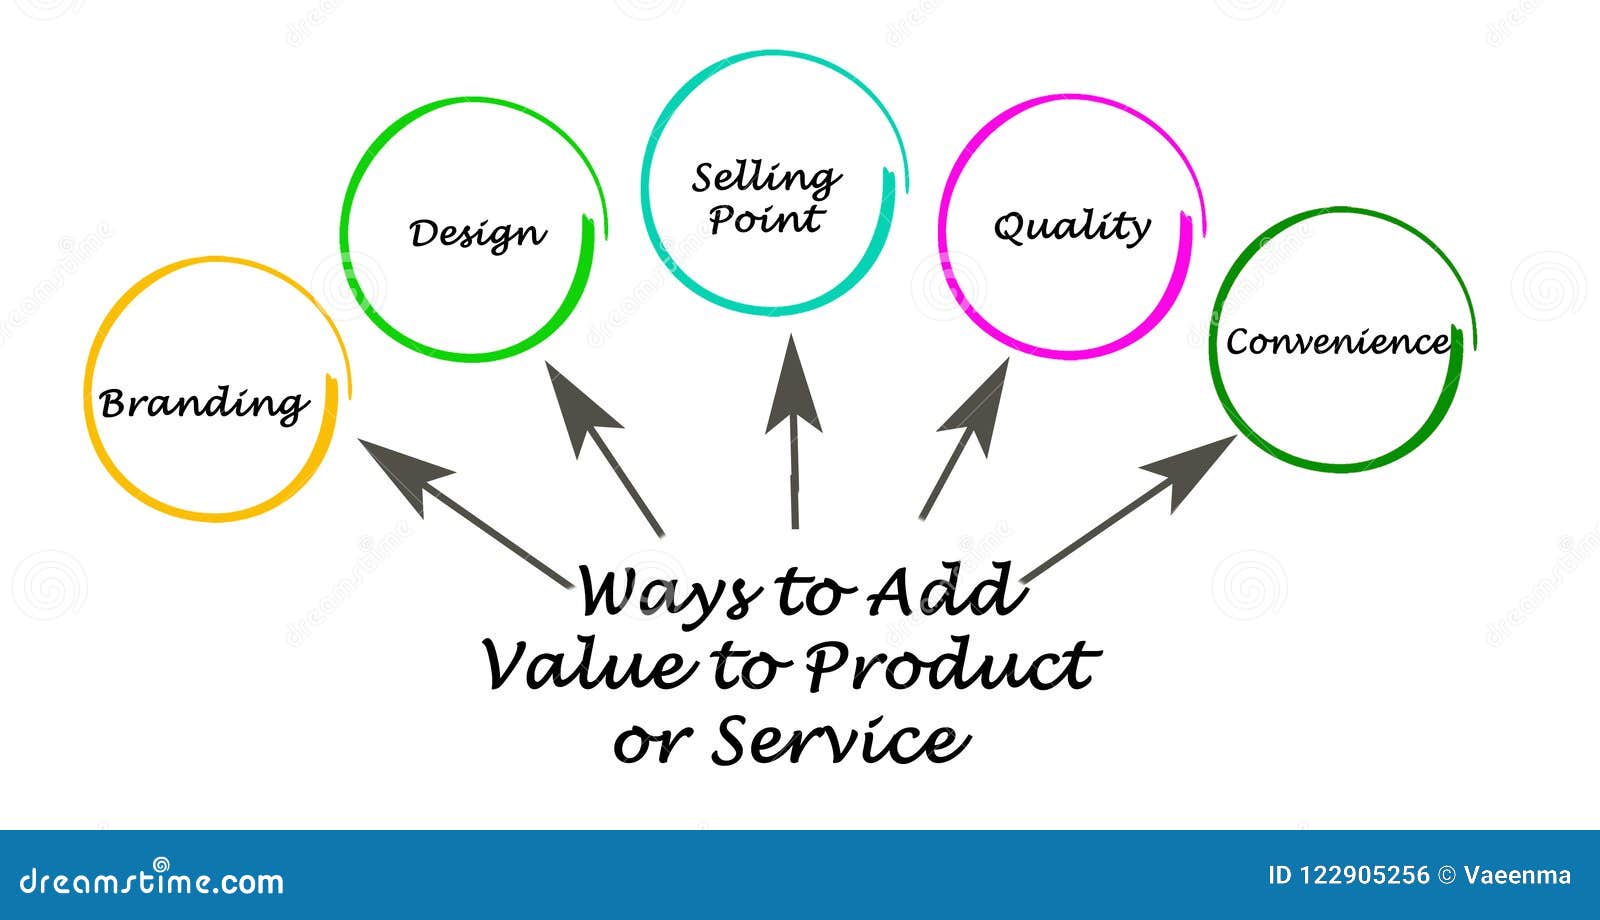 Being added value. Add value to. High value изображение. Add product. Бренд add.